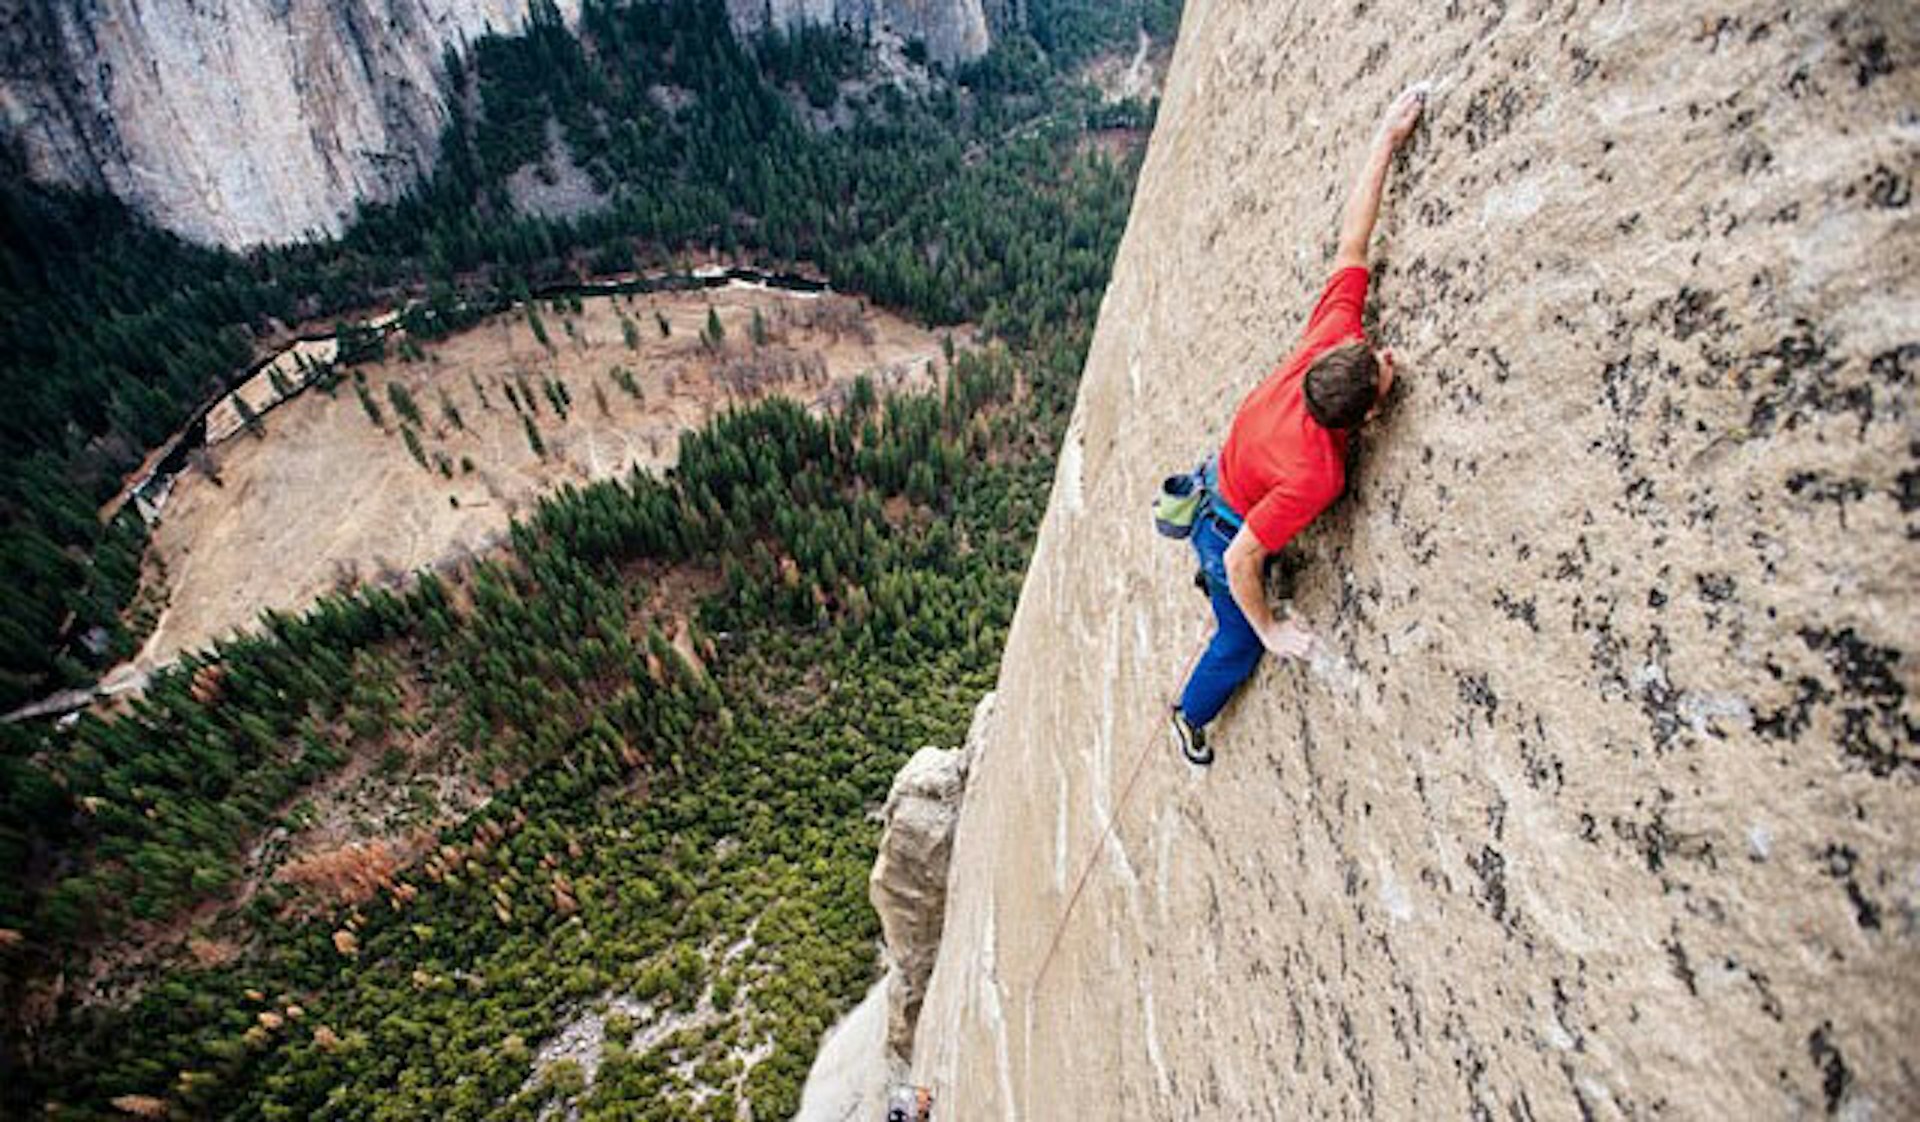 Everything you need to know about the record-breaking El Capitan climb in Yosemite